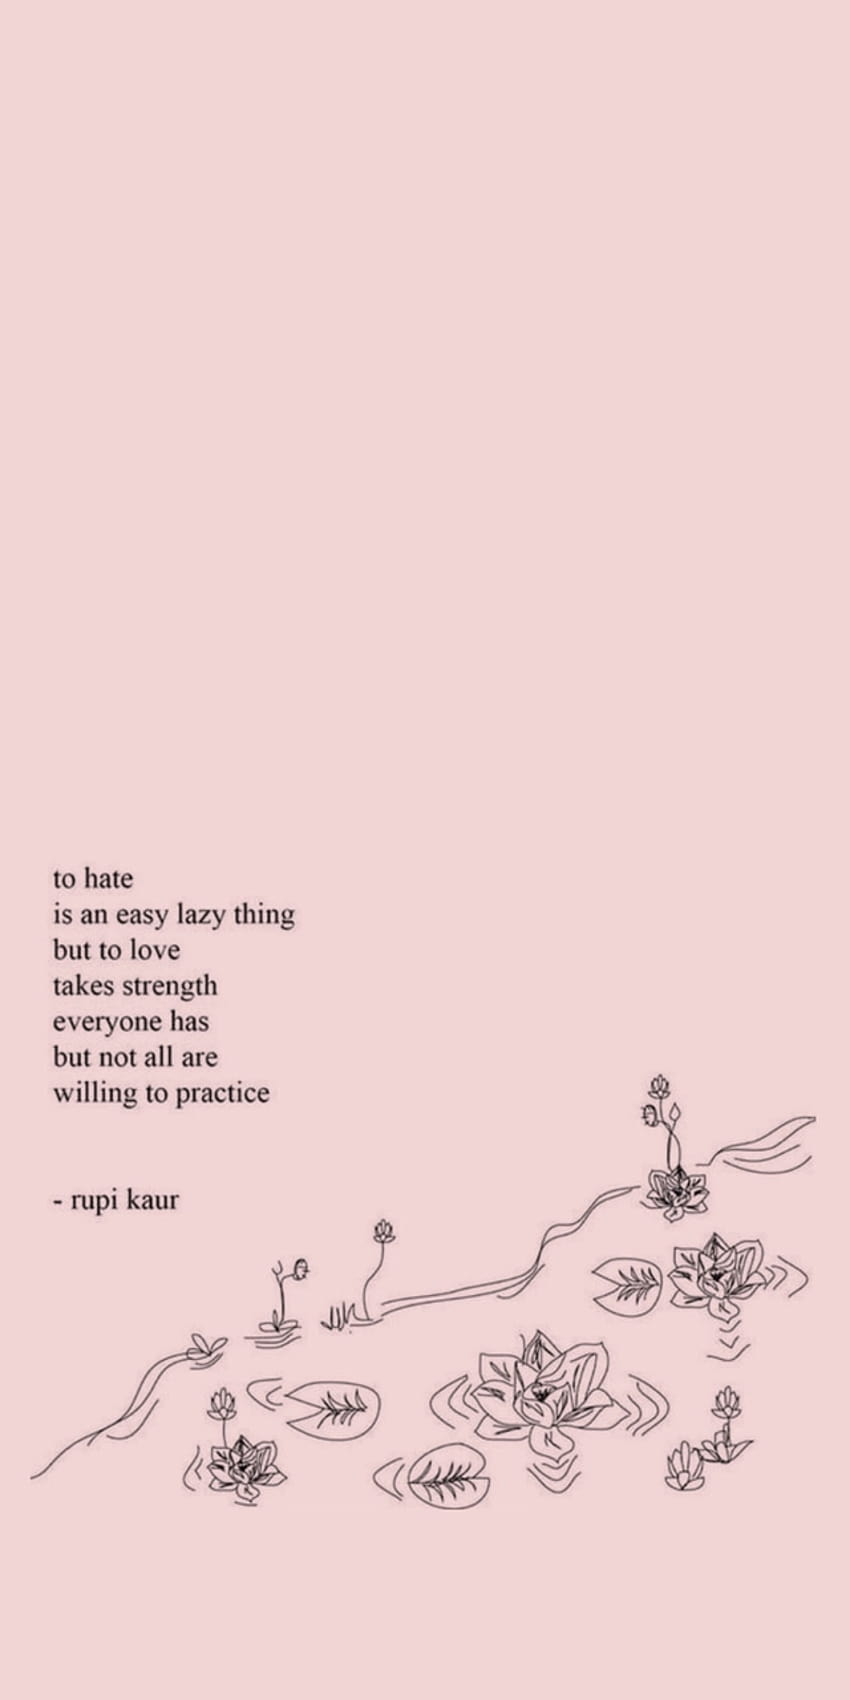 rupi kaur discovered by ➶ HD phone wallpaper